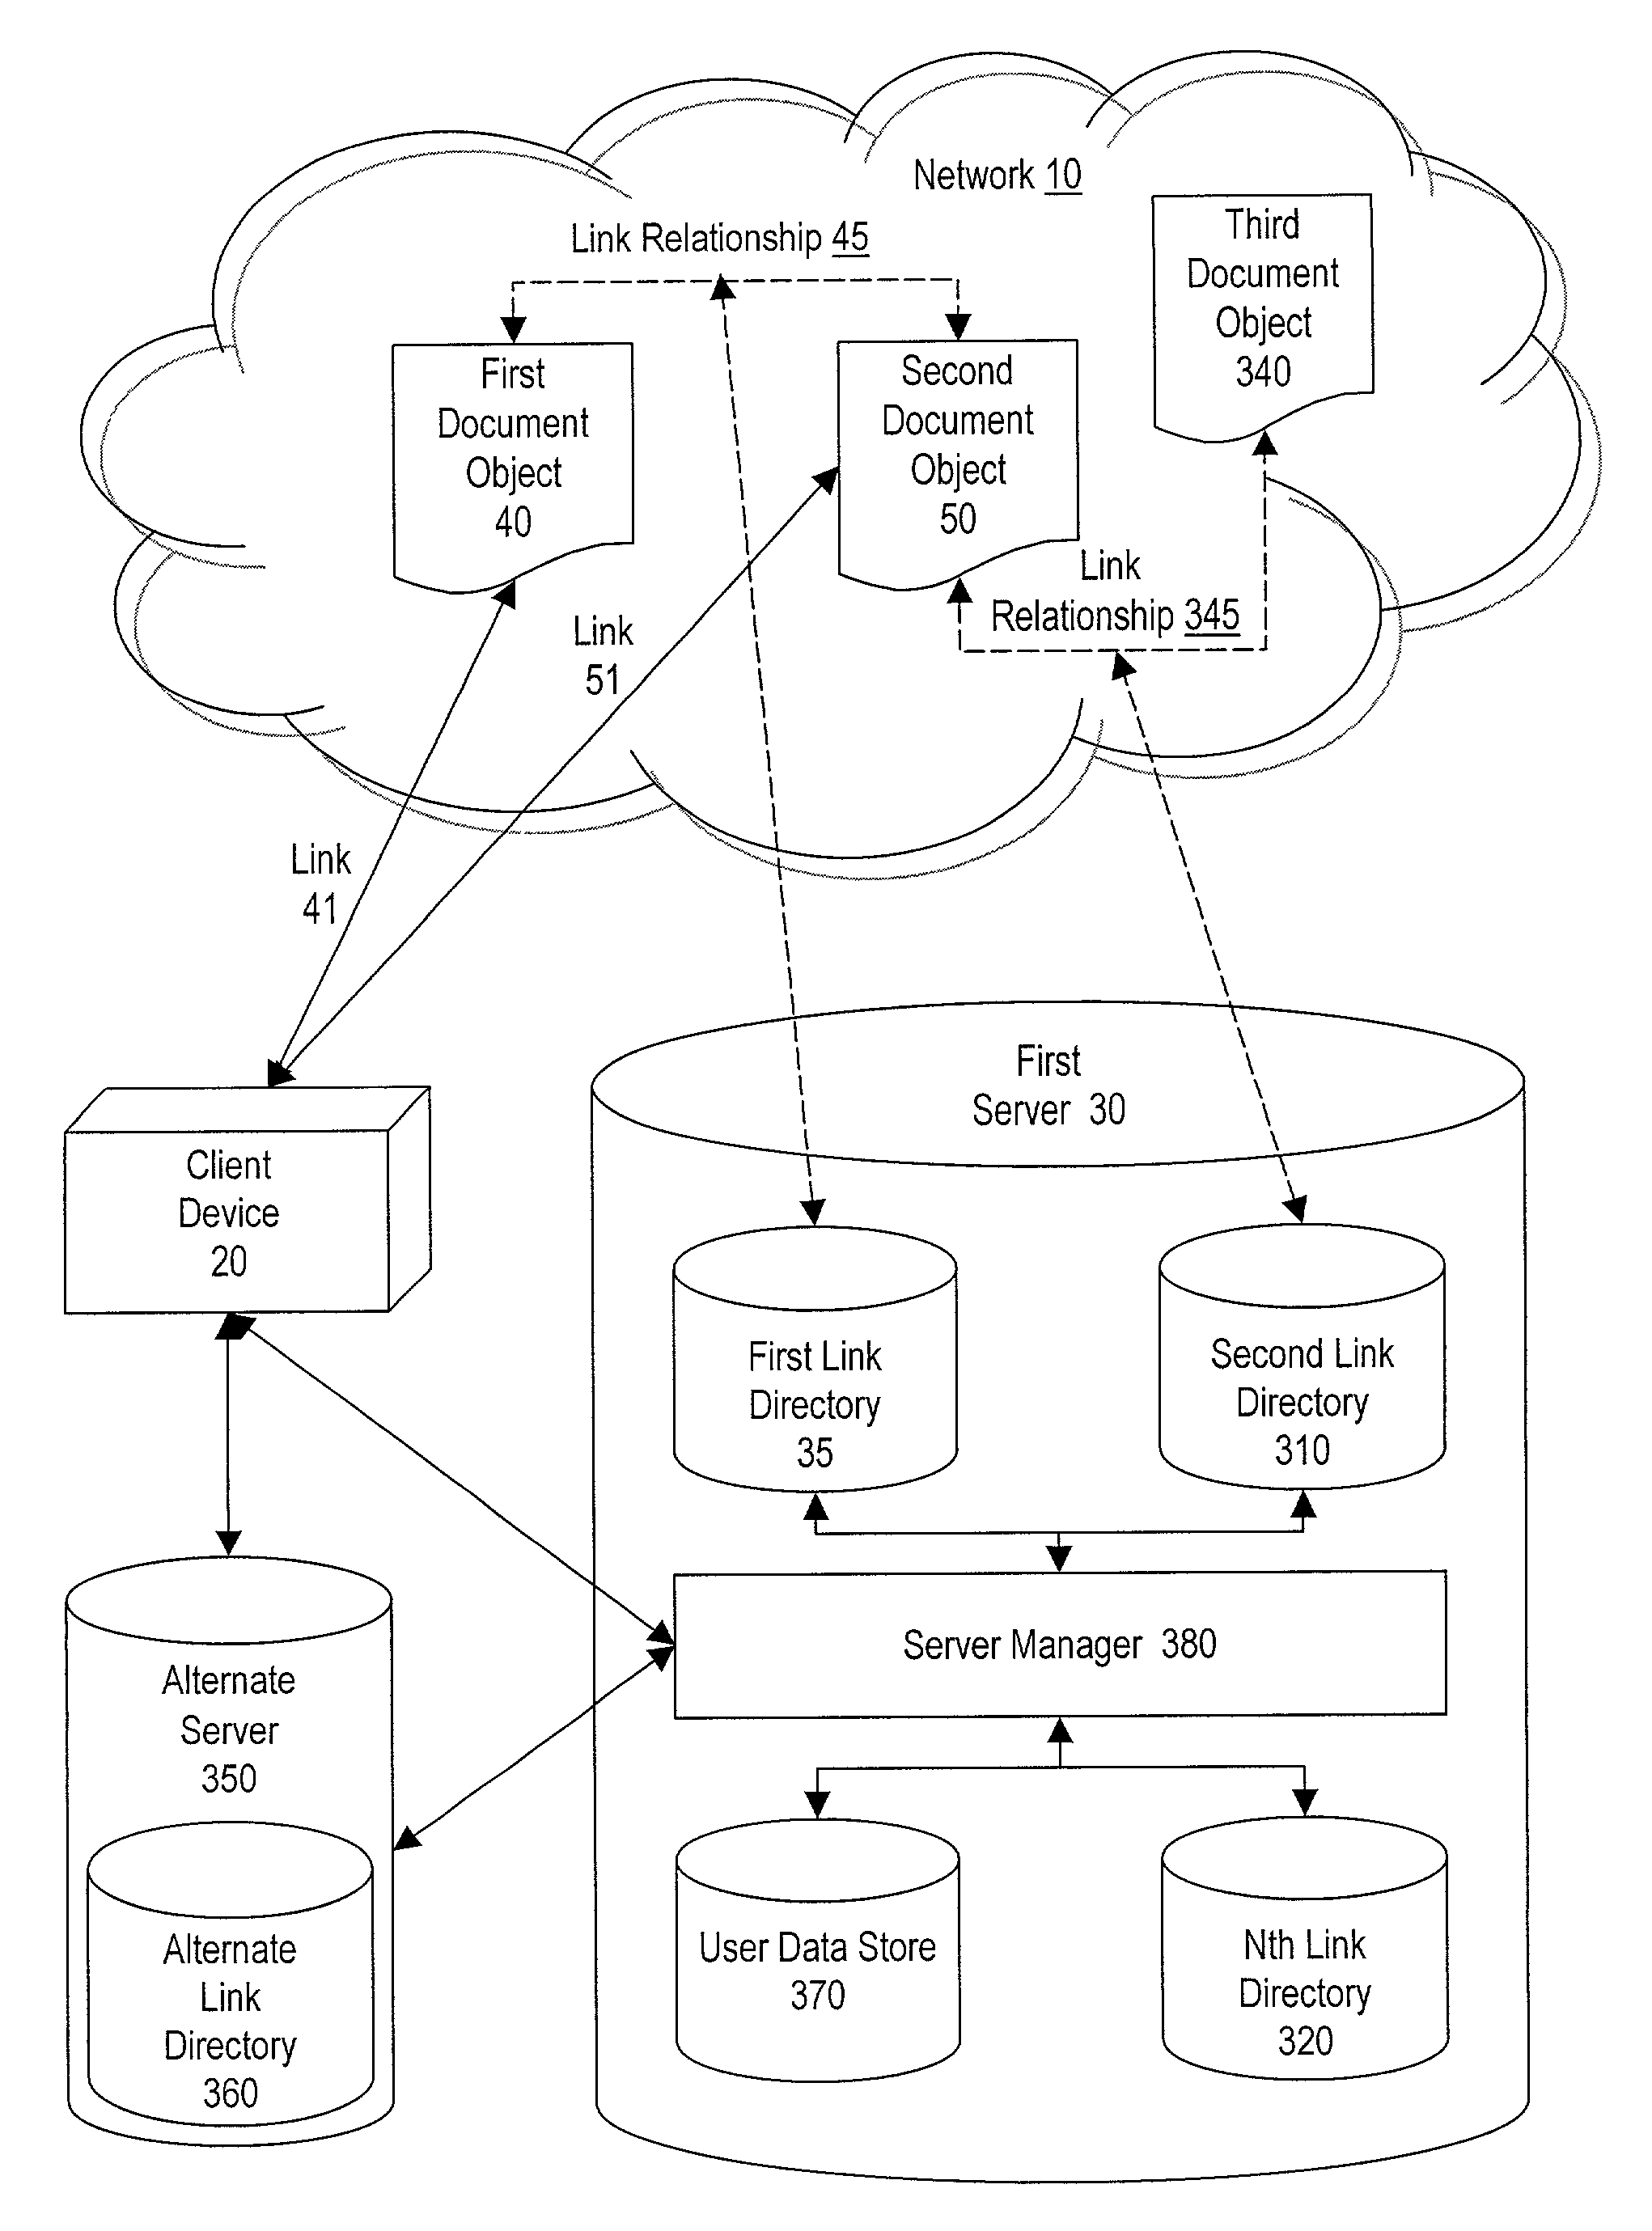 Method and system for making document objects available to users of a network